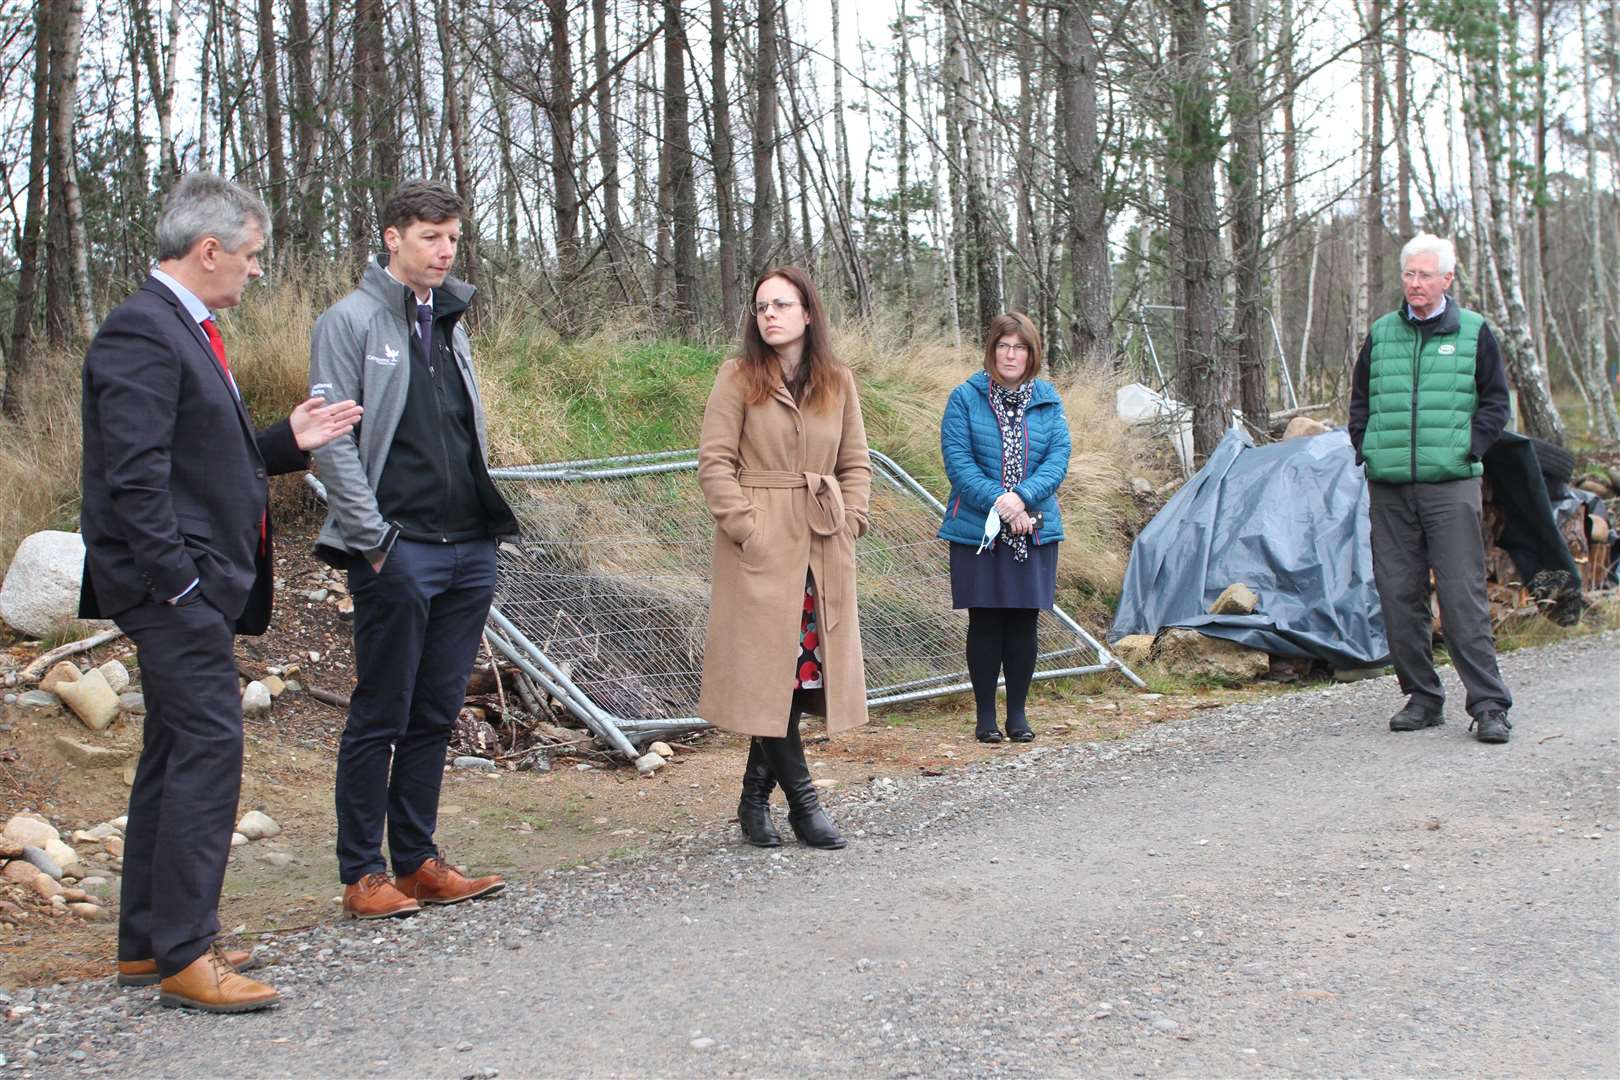 Badenoch MSP Kate Forbes (centre) in discussion at the Old Sawmill housing site at Rothiemurchus after the summit.